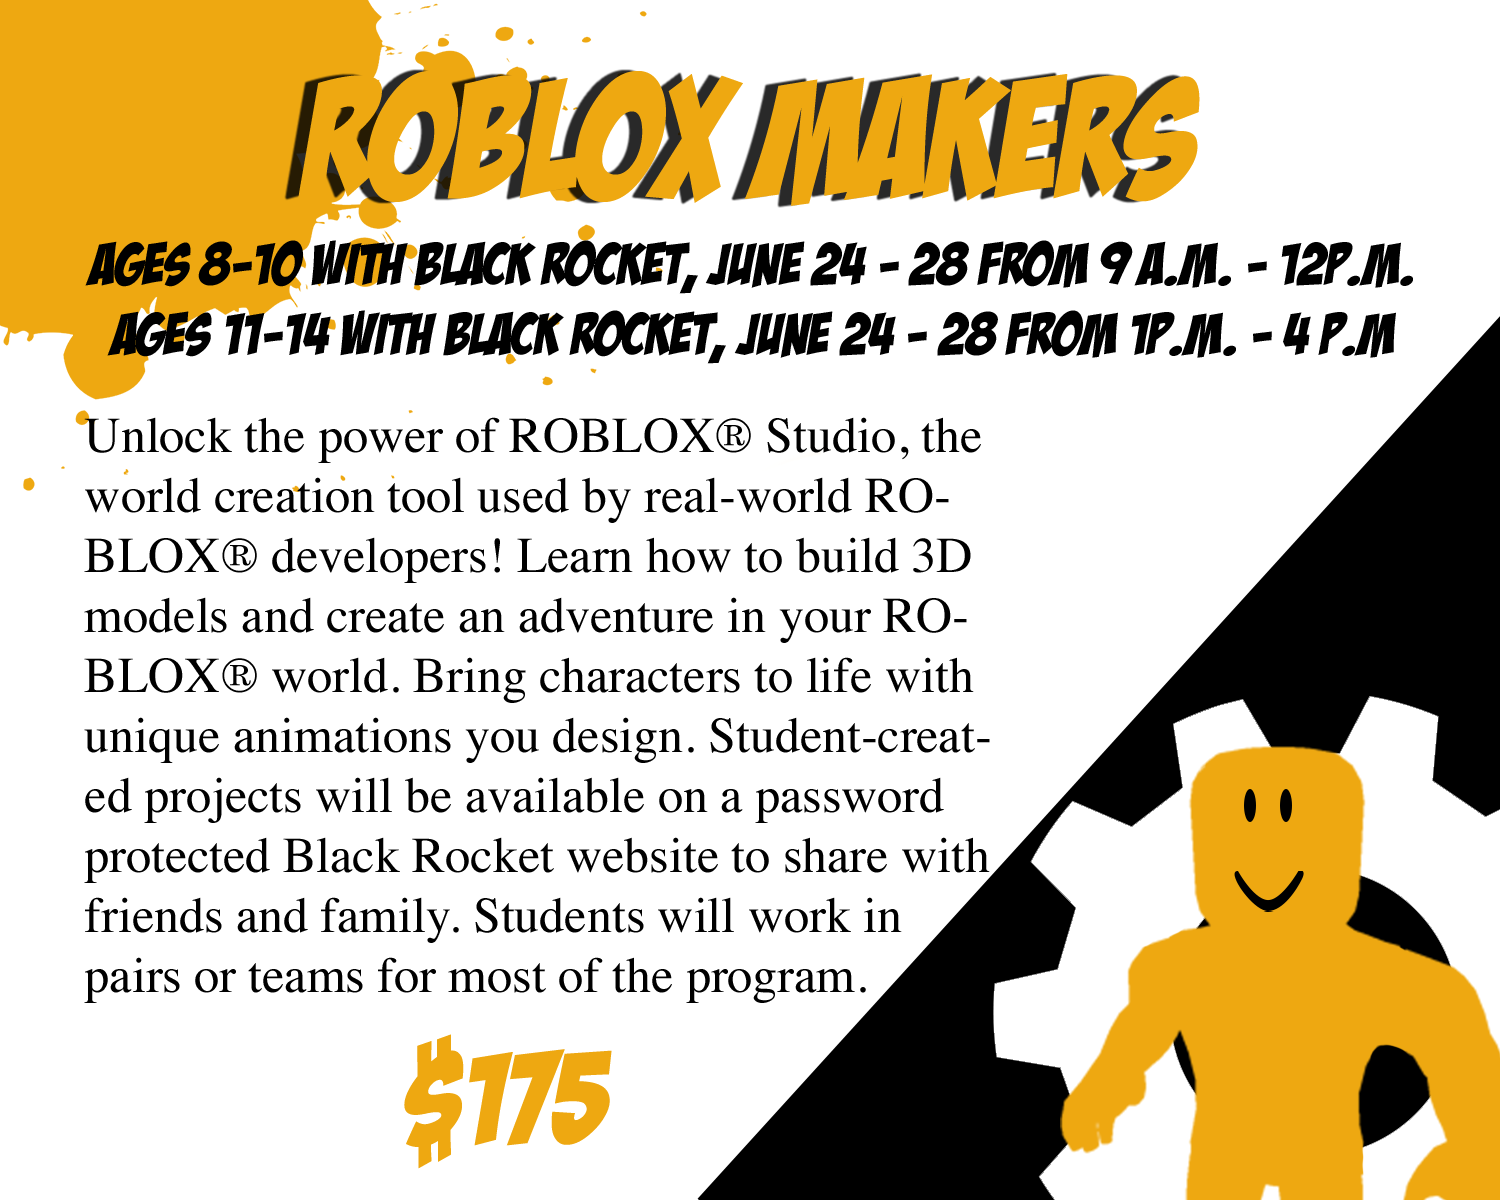 Semo Engagement Center Roblox Makers Ages 8 10 Online - 